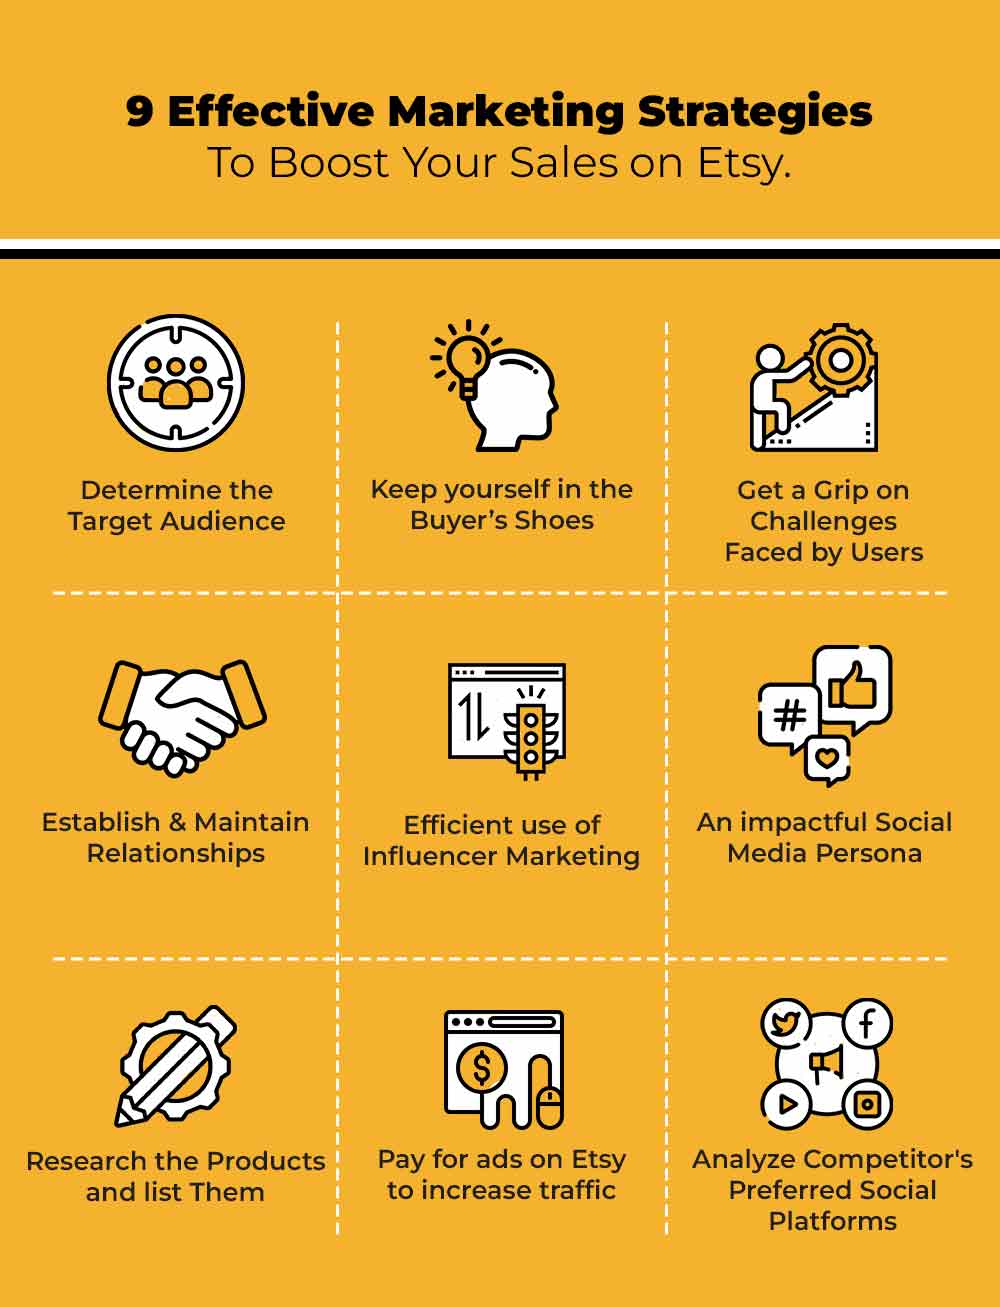 9 effective ways to boost your sales on etsy